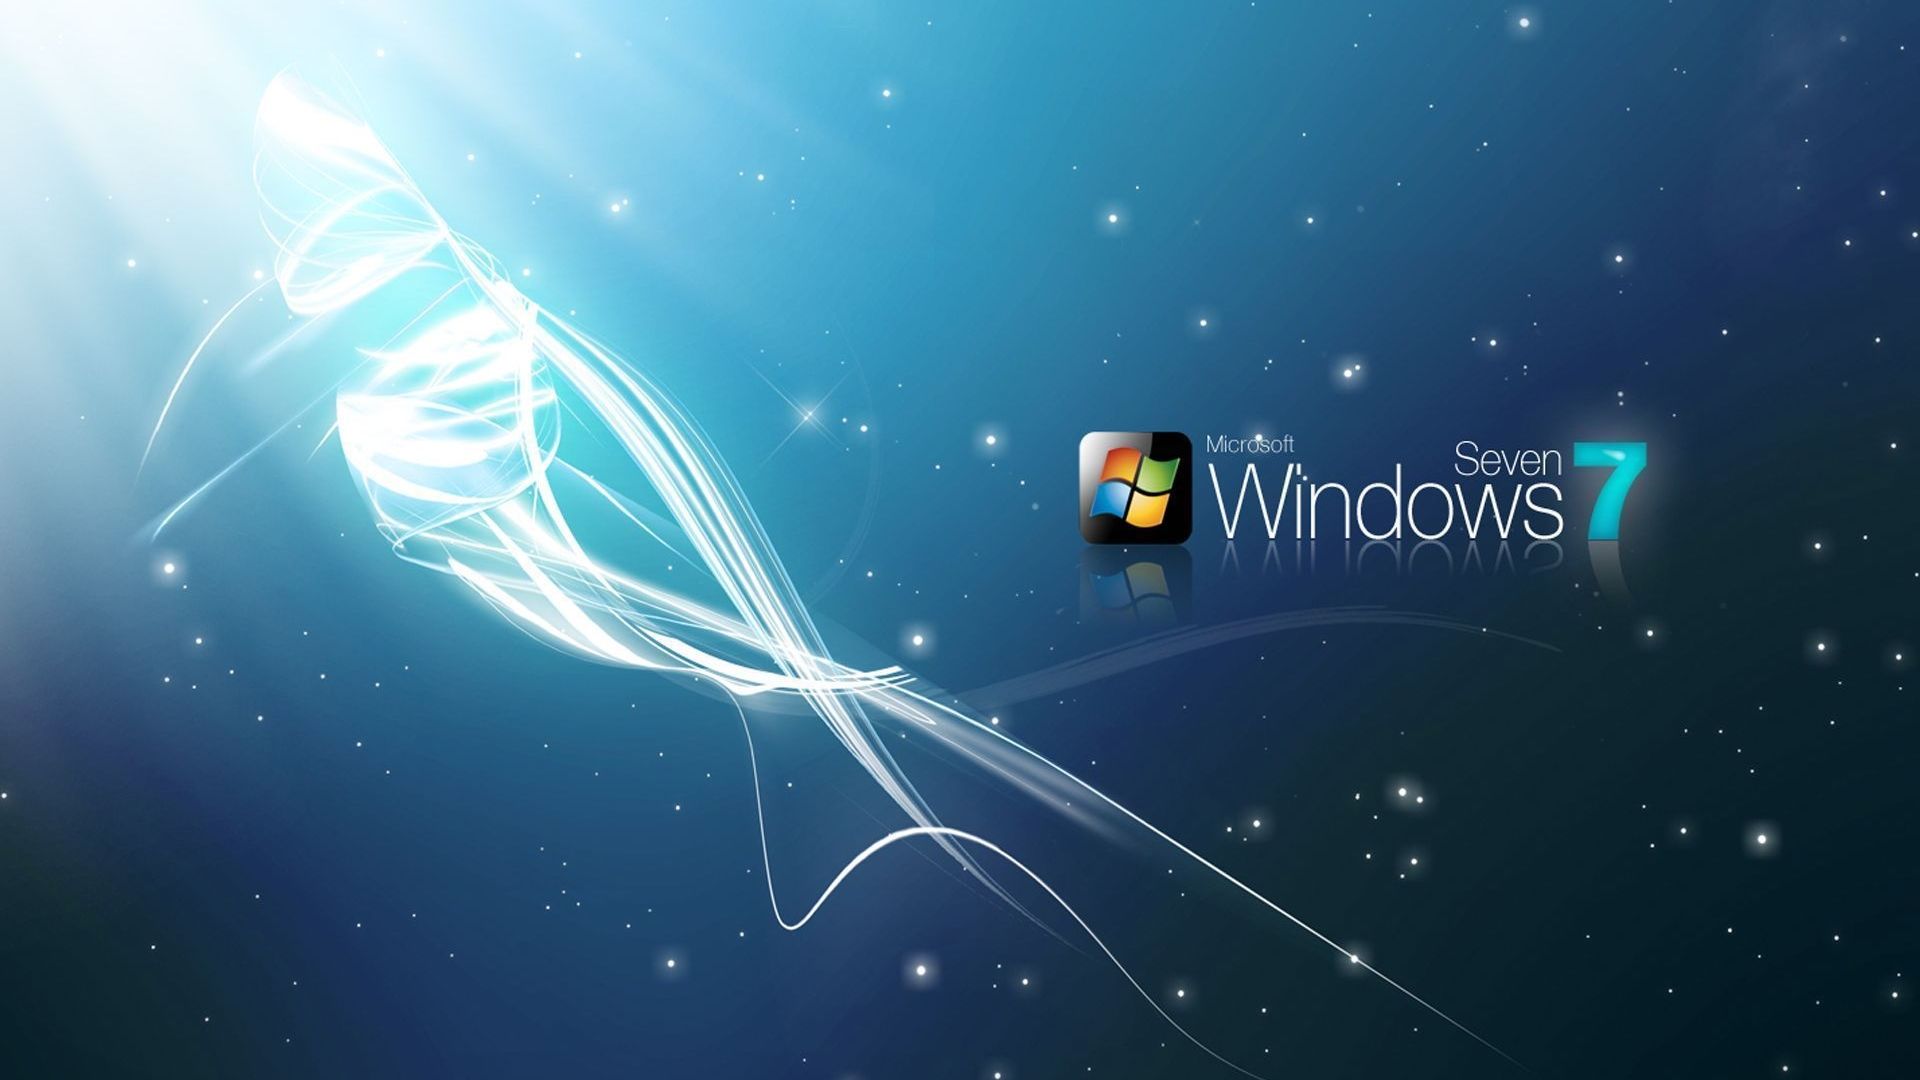 Ultimate Puter Windows Wallpaper Collection Sizes